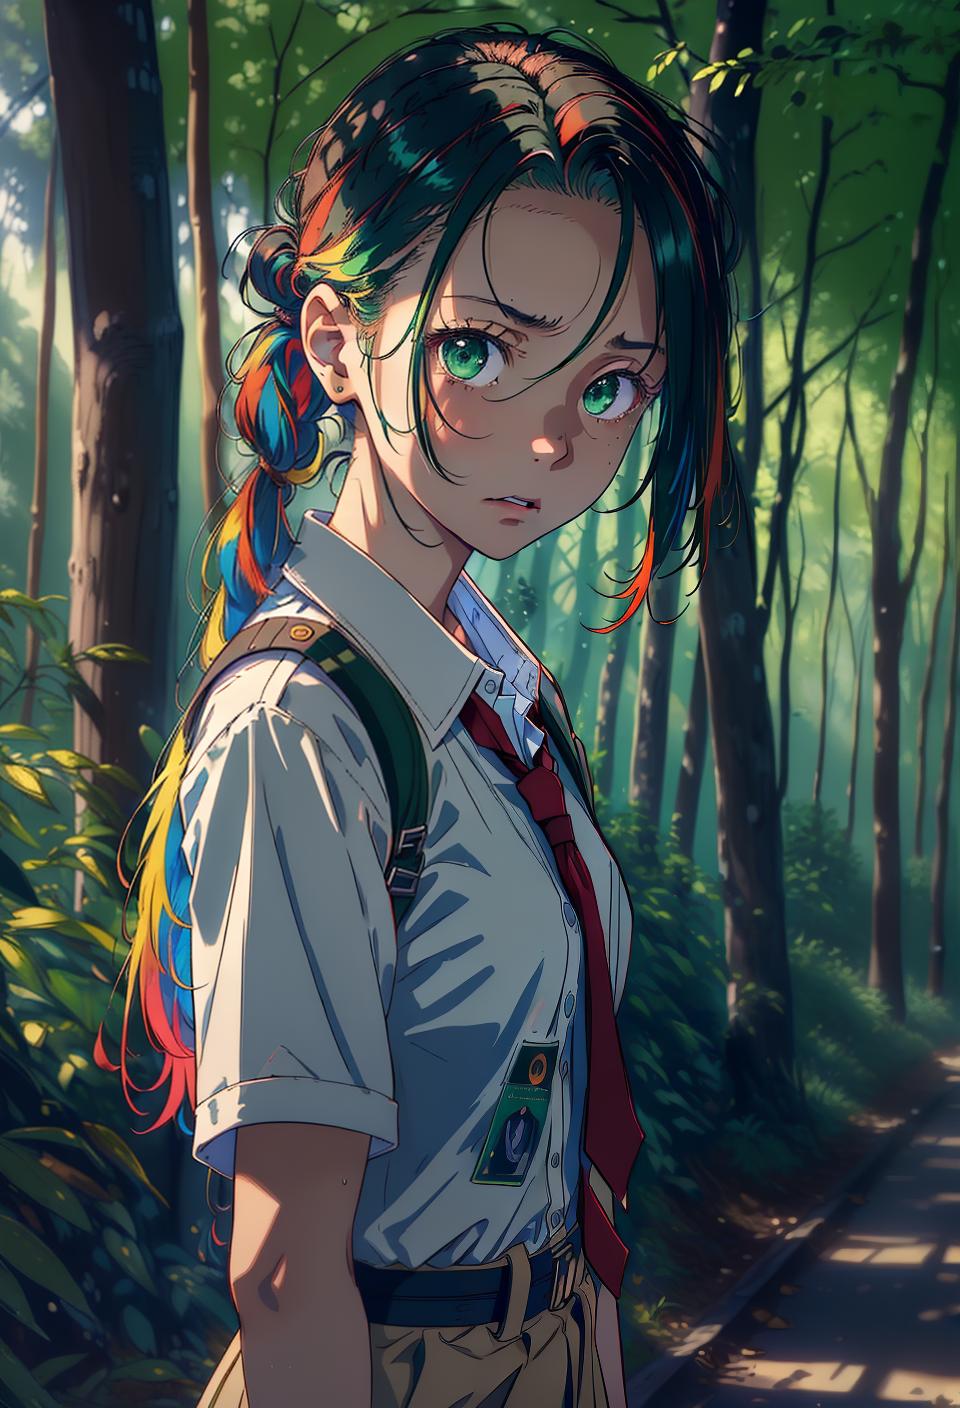  ((trending, highres, masterpiece, cinematic shot)), 1girl, young, female student uniform, forest scene, medium-length messy multicolored hair, hair slicked back, narrow green eyes, personality, worried expression, tanned skin, epic, observant